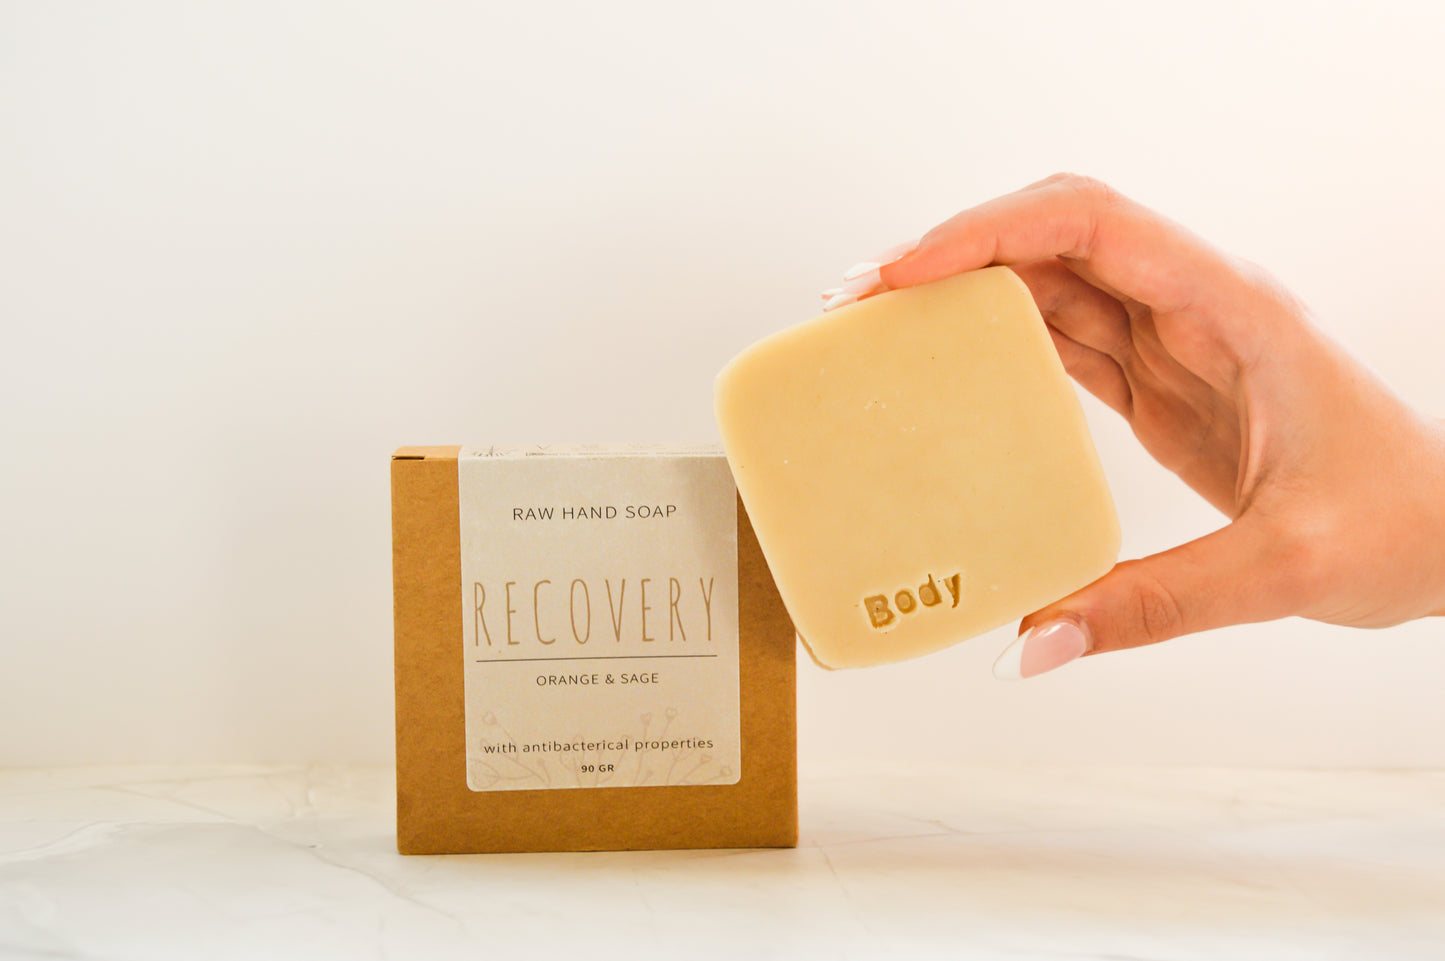 RAW HAND SOAP BAR - RECOVERY with orange & sage